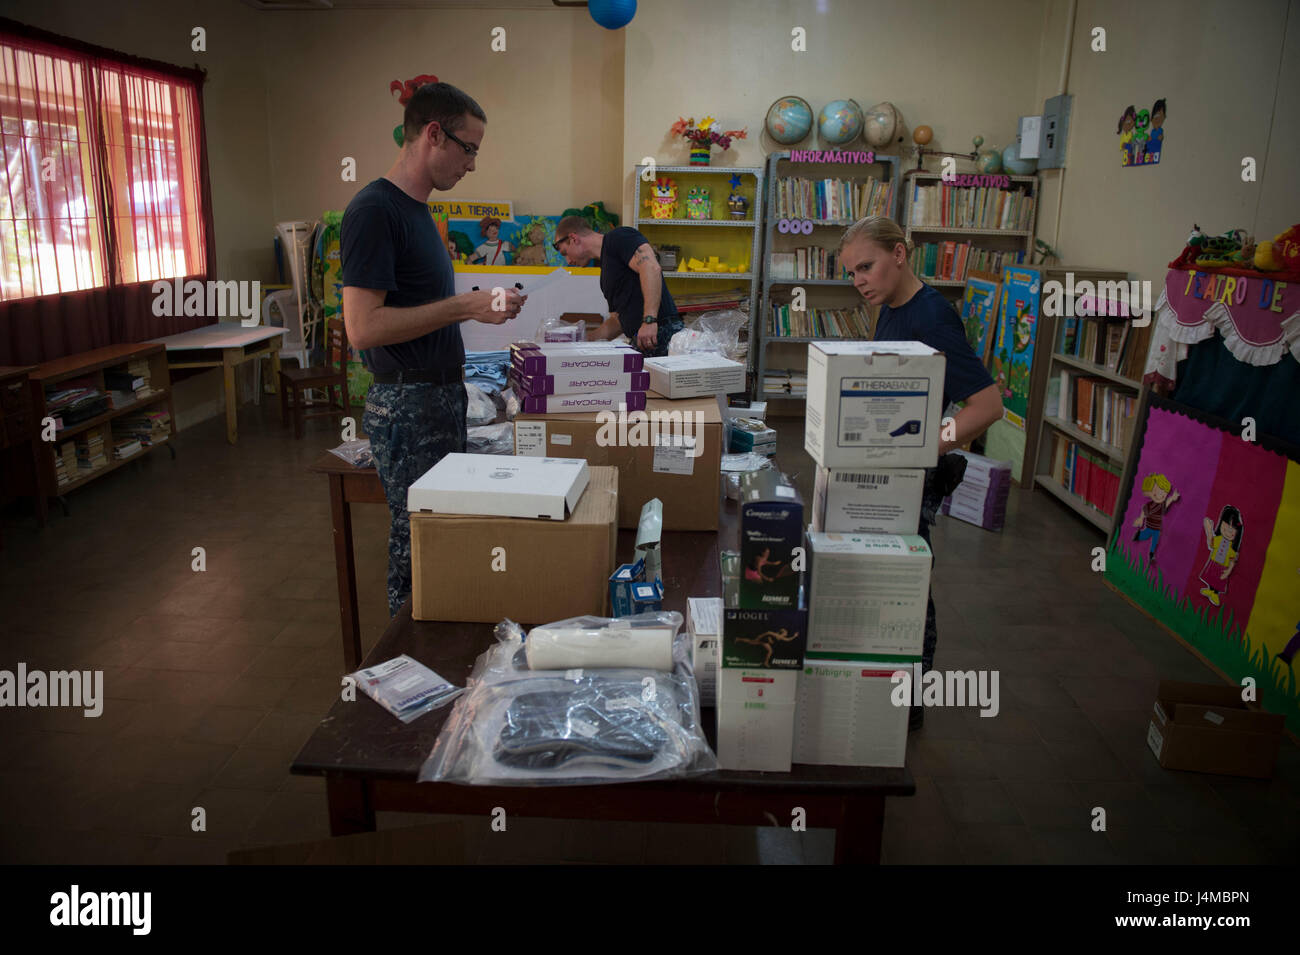 170220-N-YL073-057 TRUJILLO, Honduras (Feb. 20, 2017) – Sailors organize medical supplies at the Continuing Promise 2017 (CP-17) medical site in support of CP-17's visit to Trujillo, Honduras. CP-17 is a U.S. Southern Command-sponsored and U.S. Naval Forces Southern Command/U.S. 4th Fleet-conducted deployment to conduct civil-military operations including humanitarian assistance, training engagements, and medical, dental, and veterinary support in an effort to show U.S. support and commitment to Central and South America. (U.S. Navy photo by Mass Communication Specialist 2nd Class Shamira Puri Stock Photo